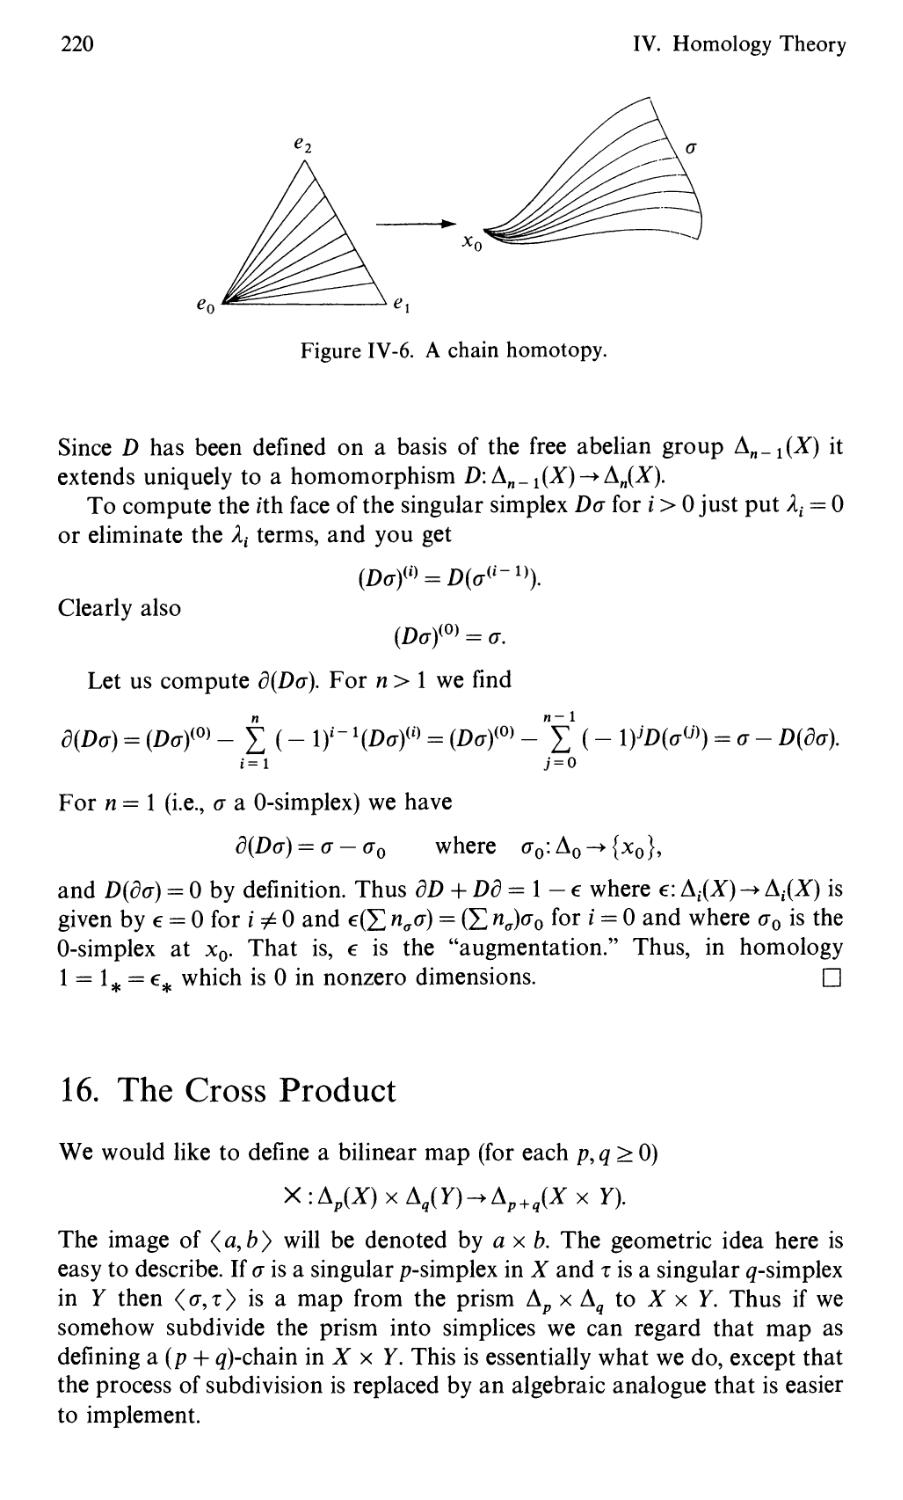 16. The Cross Product